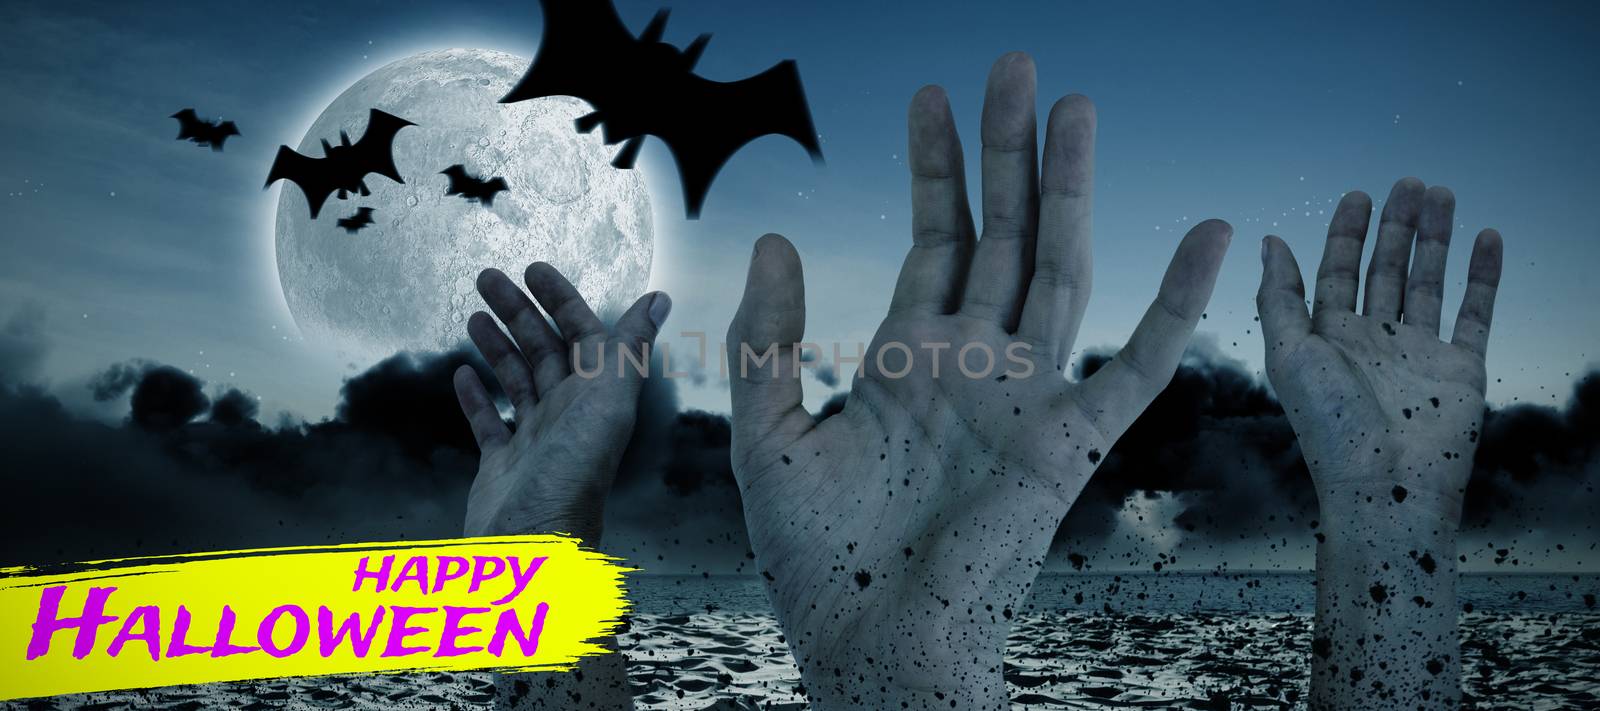 Digital image of happy Halloween text against digital image of bats flying over cropped hands